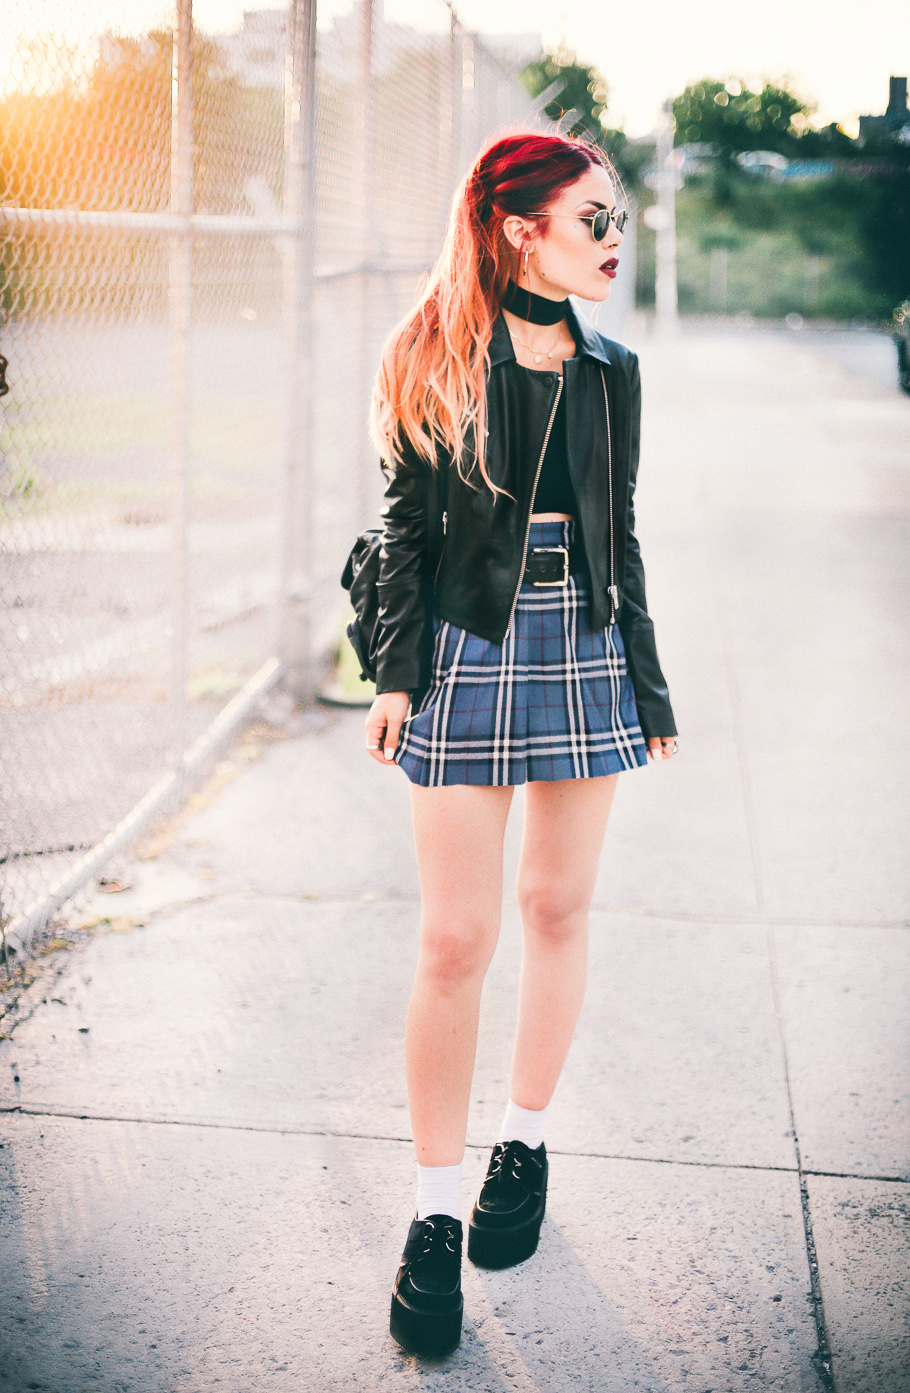 Le Happy wearing creepers with a plaid skirt and Elizabeth and James leather jacket